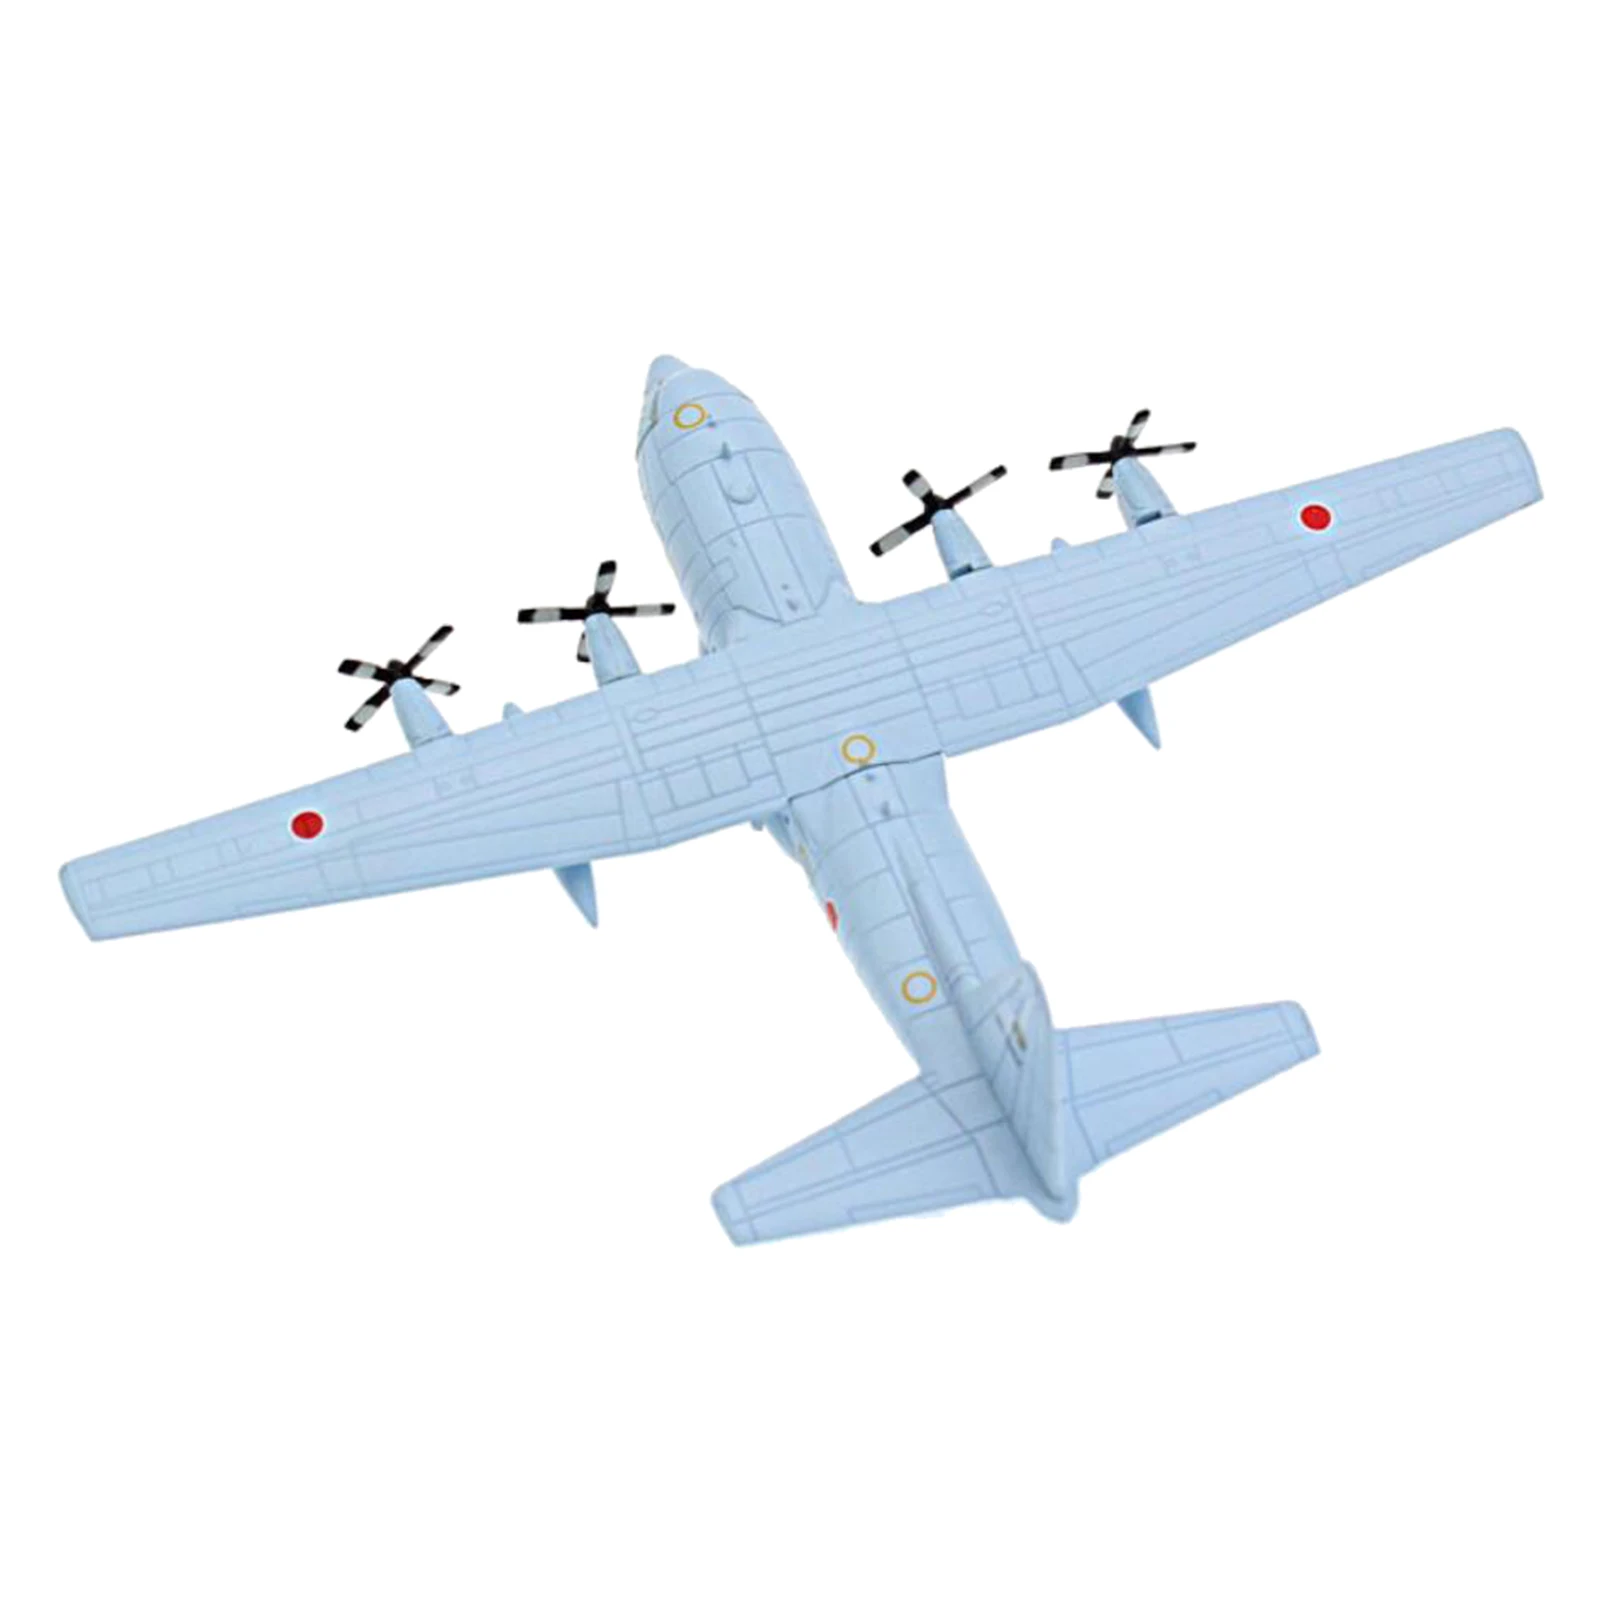 Details about   C-130H Aircraft Model 1/250 Alloy Diecast Plane Airplane Aircraft Kids Gift 